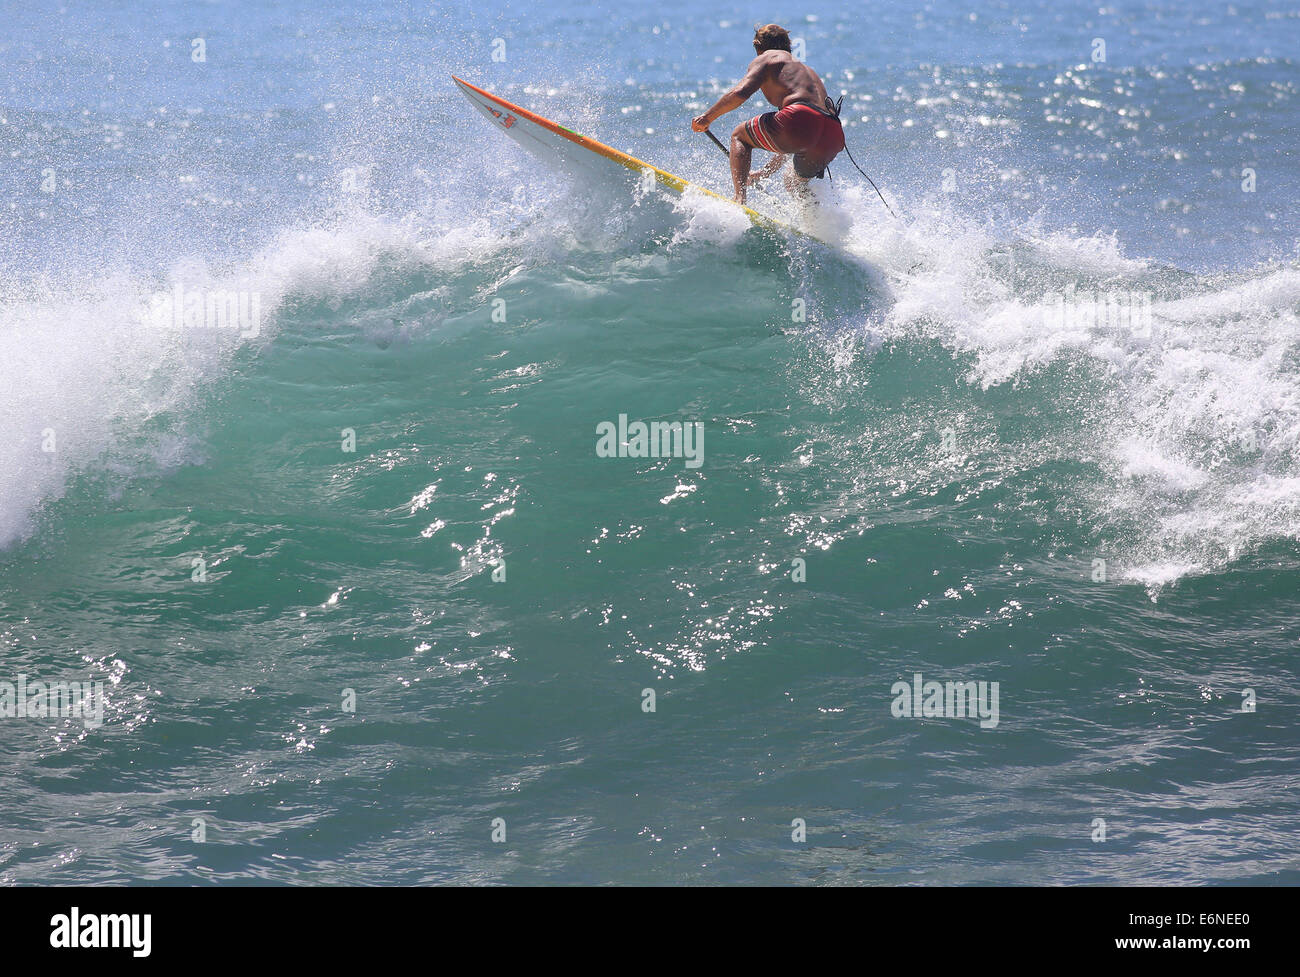 Malibu, California, USA. 27th Aug, 2014. Professional surfer Laird Hamilton rides a wave in Malibu at Surfrider beach as big waves swelled by distant Hurricane Marie arrives at Southern California beaches. Credit:  ZUMA Press, Inc./Alamy Live News Stock Photo